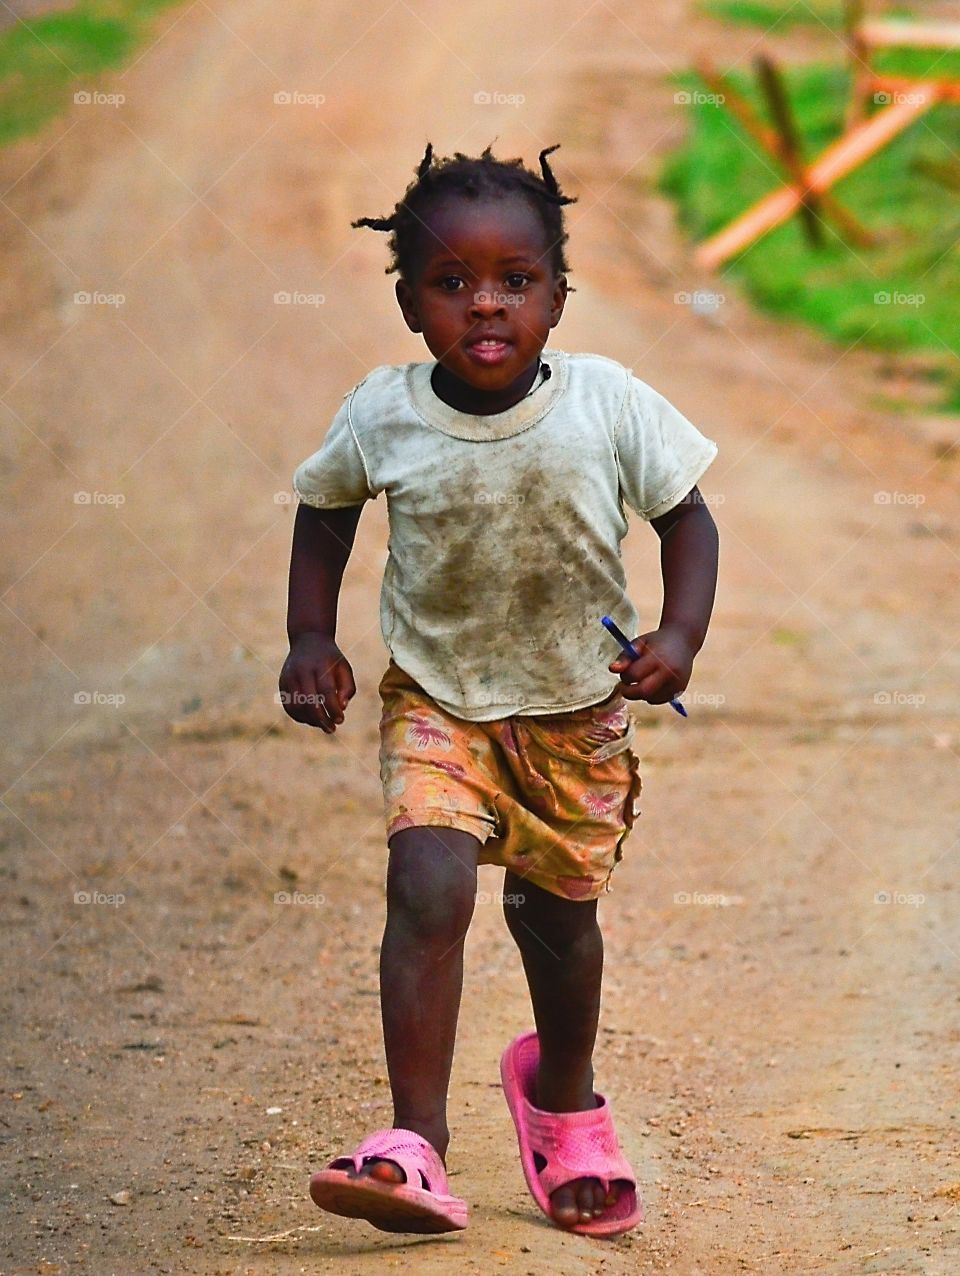 going to school. this little child was walking every day 5 km to school with his pensil and diferent flip flops